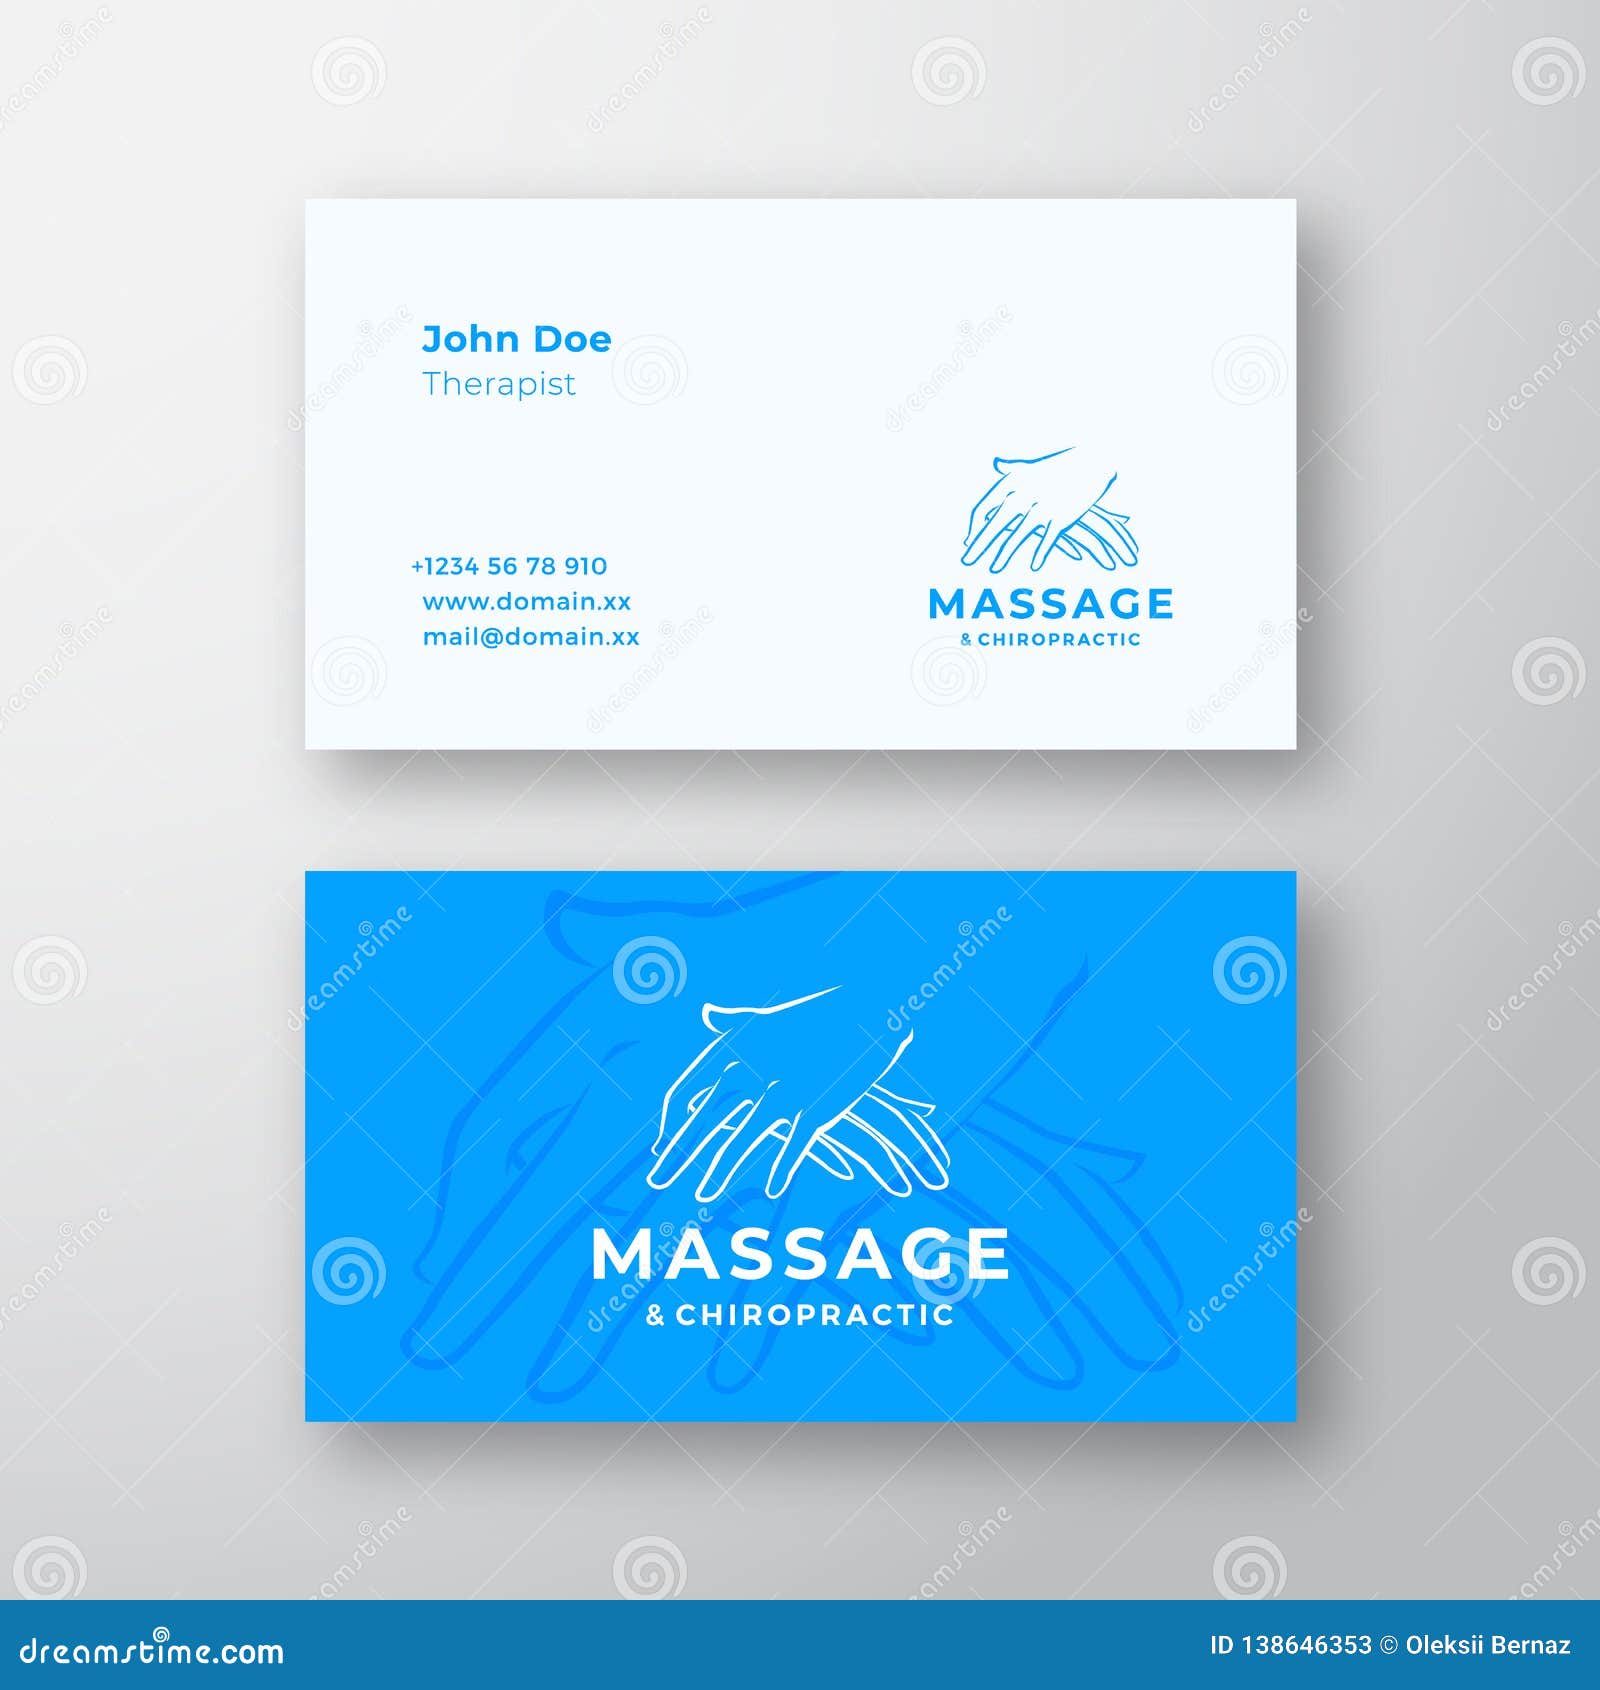 Massage and Chiropractic Abstract Vector Logo and Business Card With Massage Therapy Business Card Templates